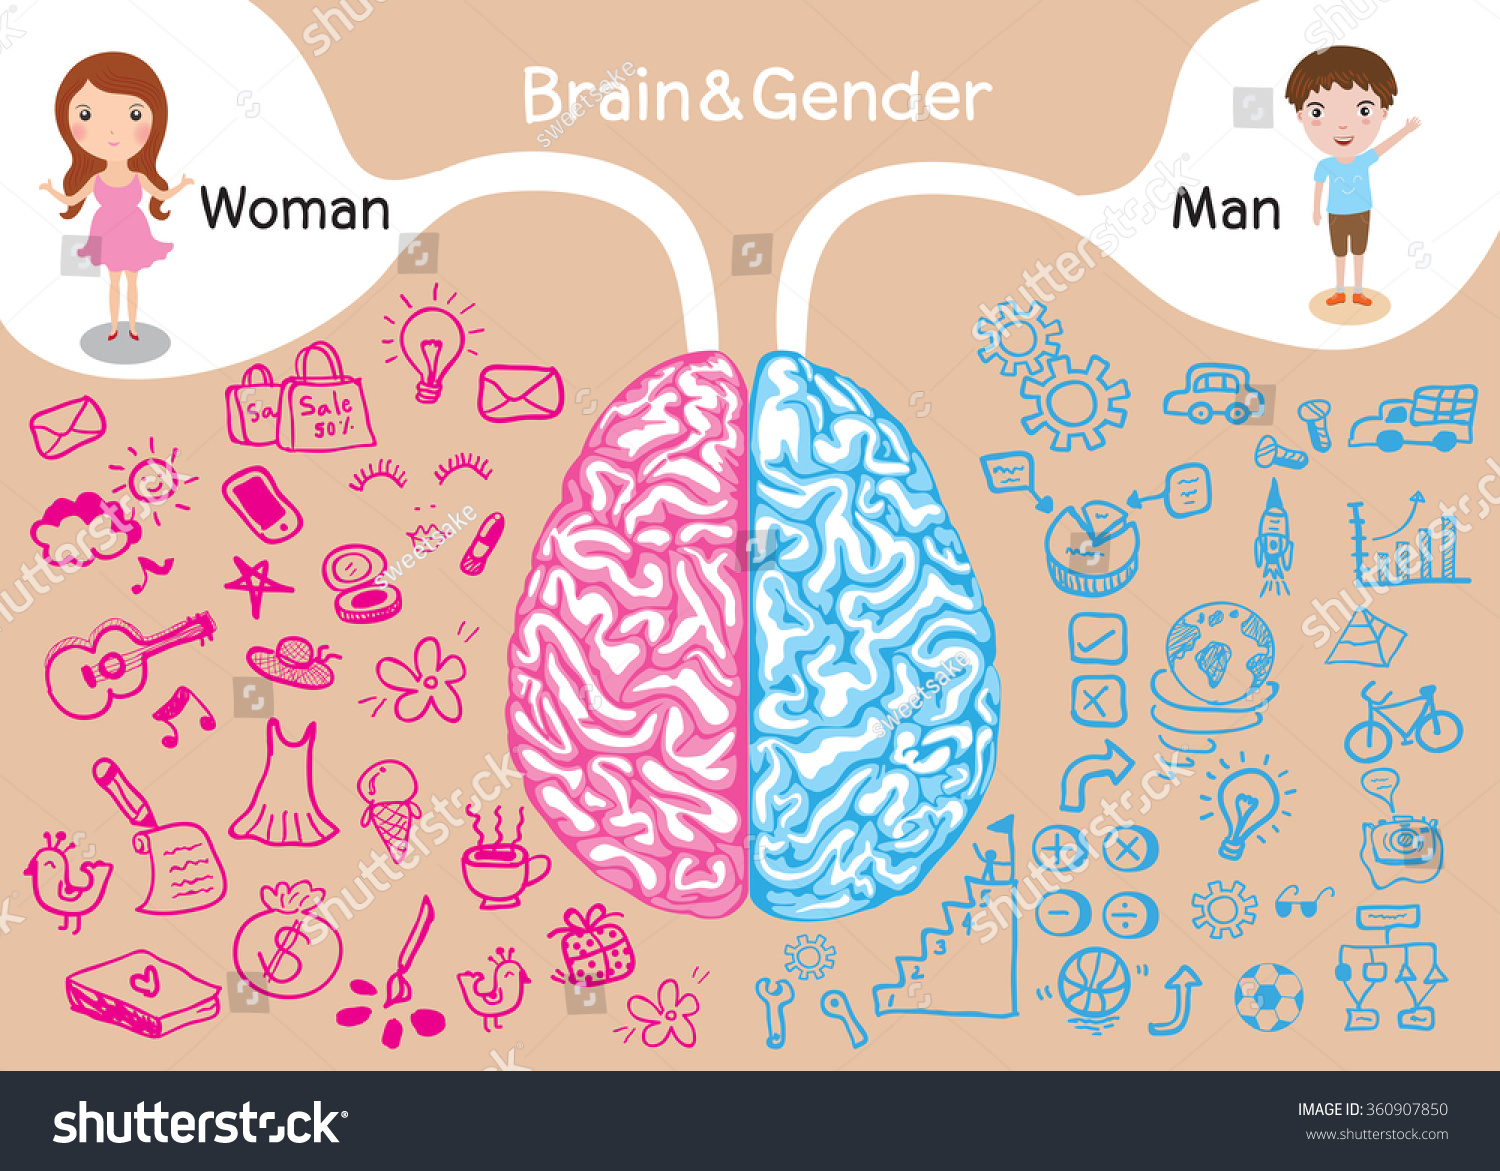 Brain And Gender Difference Between Man And Woman Stock Vector Illustration 360907850 Shutterstock